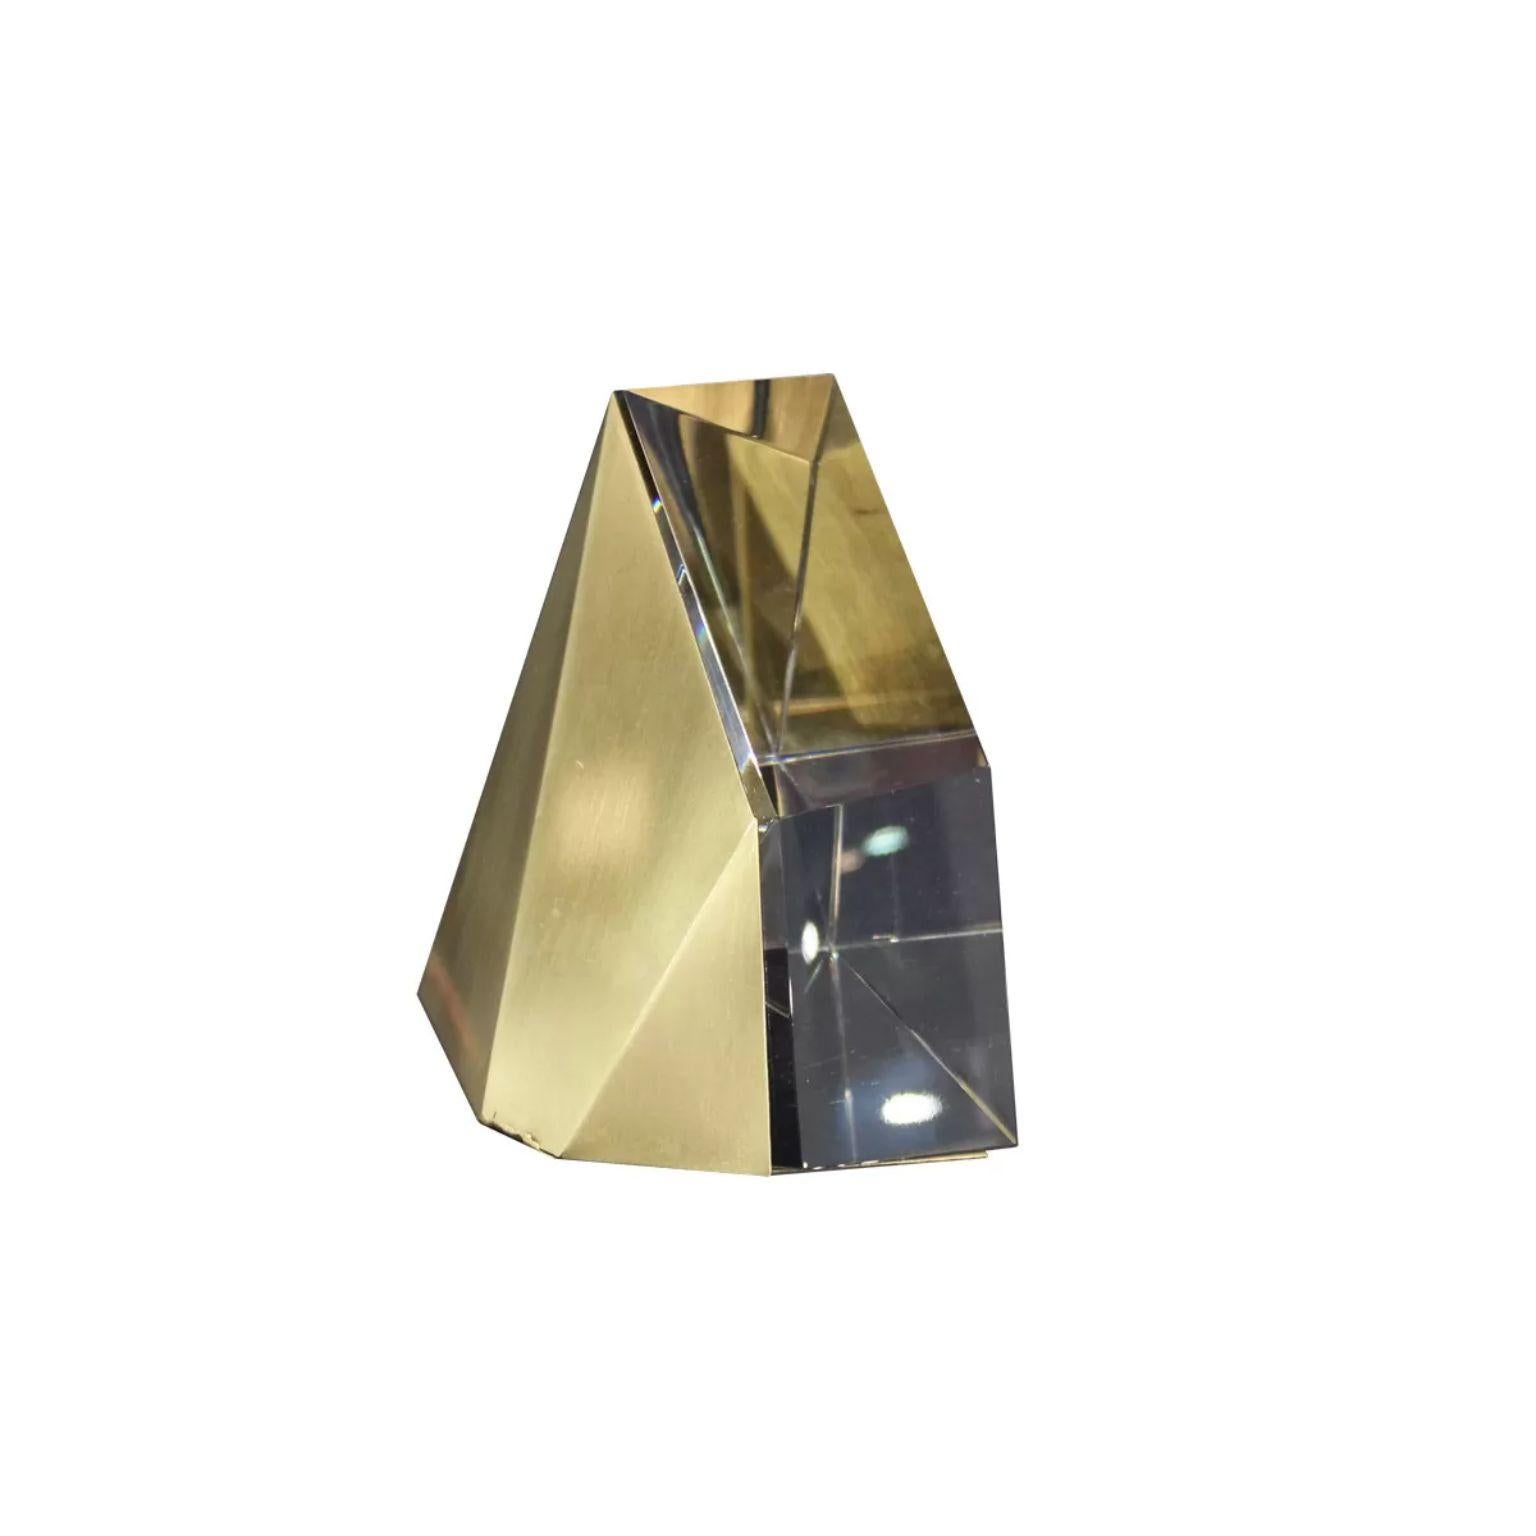 Crystal and Brass Bookend by Dainte
Dimensions: D 19 x W 18 x H 15 cm.
Materials: Crystal and brass.

The multifaceted triangular bookend is brilliantly designed with light-bending clear crystal complemented by shiny metallic brass accents.